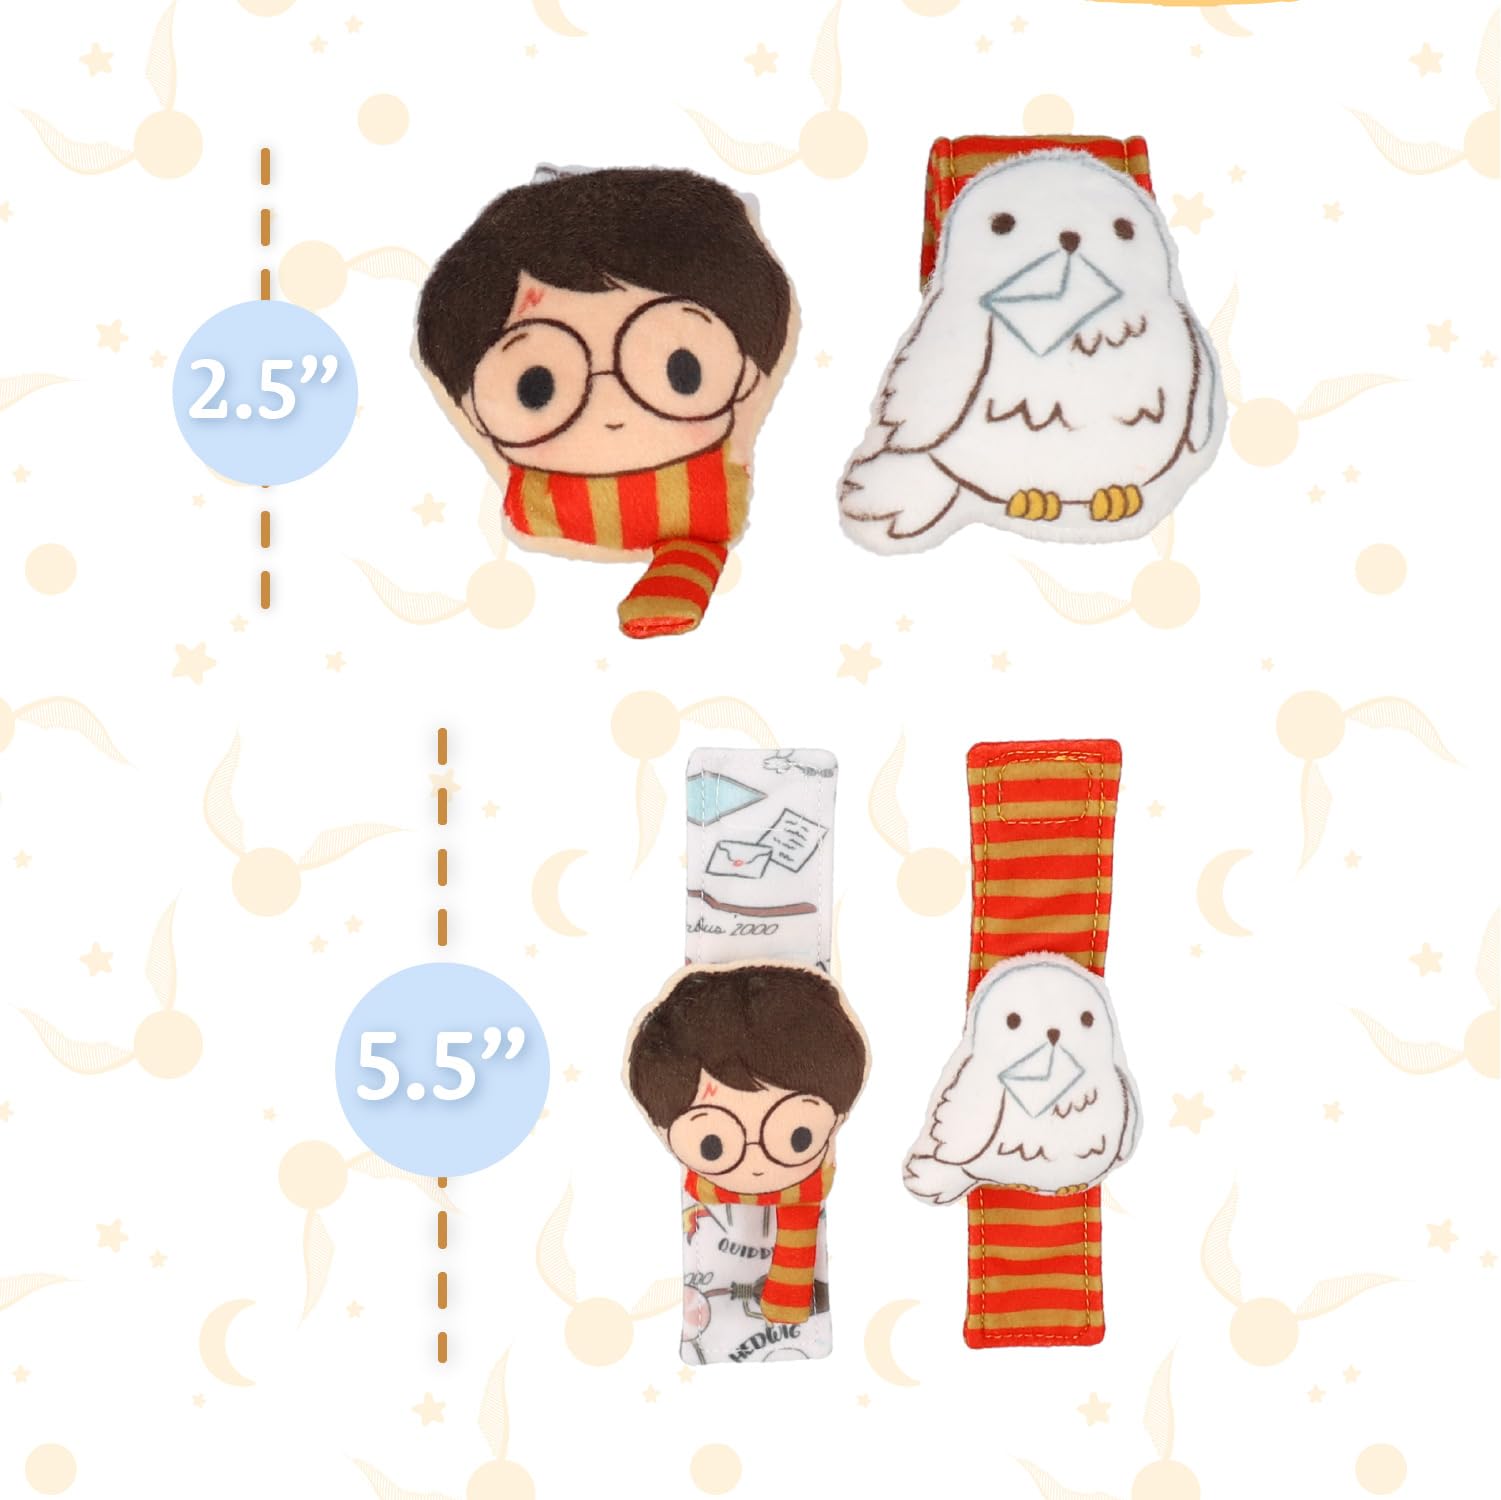 KIDS PREFERRED Harry Potter Hedwig Baby Infant Wrist Rattles with Hedwig Plush Rattle - Soft Baby Wrist Rattles Encourage Leaning Development Newborn to 12 Months Boys and Girls